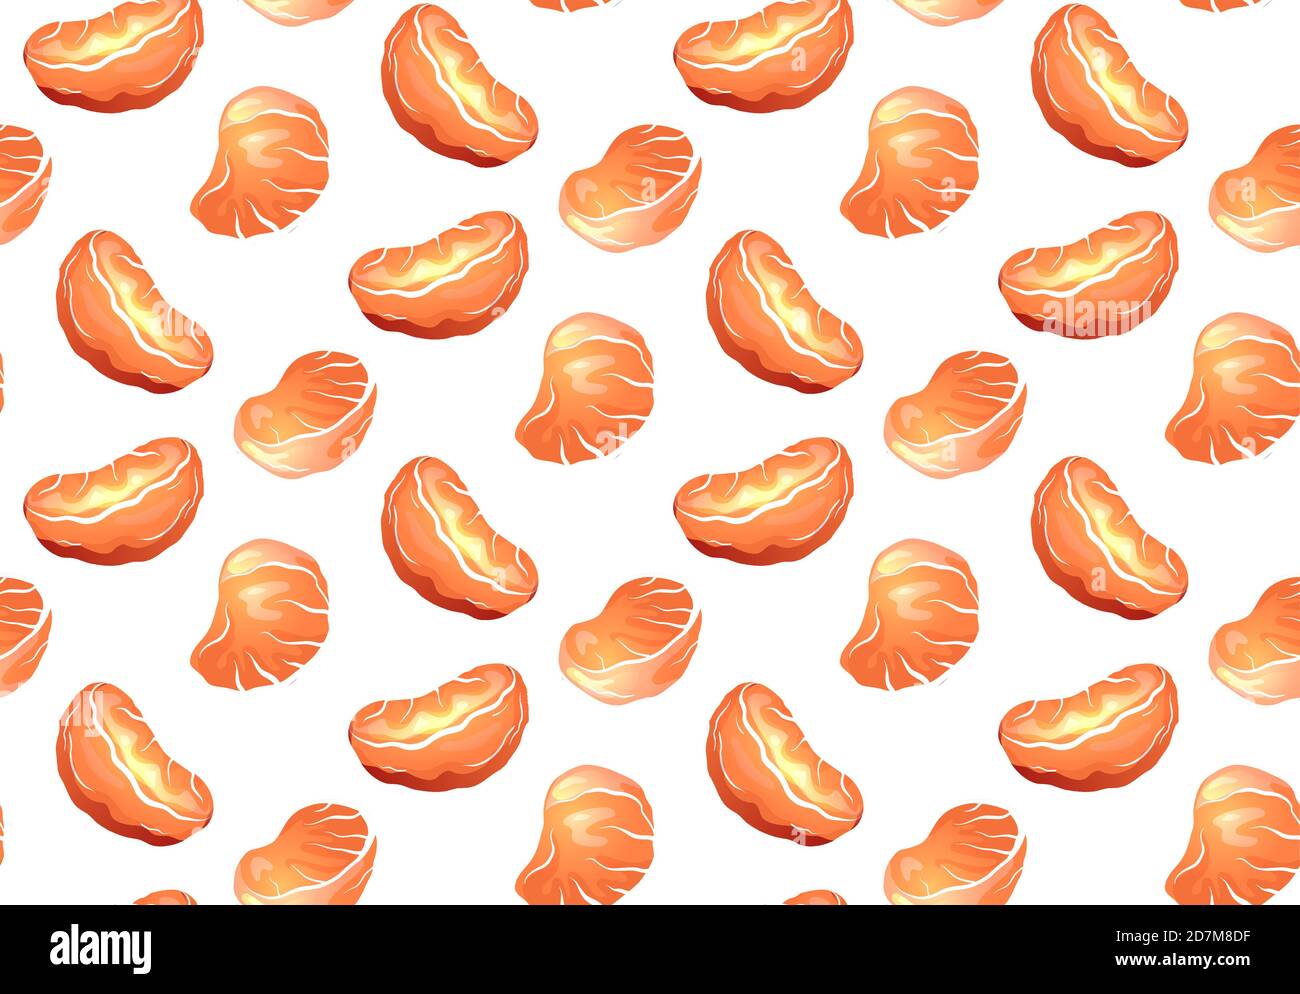 Seamless texture with cartoon orange slice of tangerines on white background. Vector food pattern for fabrics, backgrounds and your design. Stock Vector